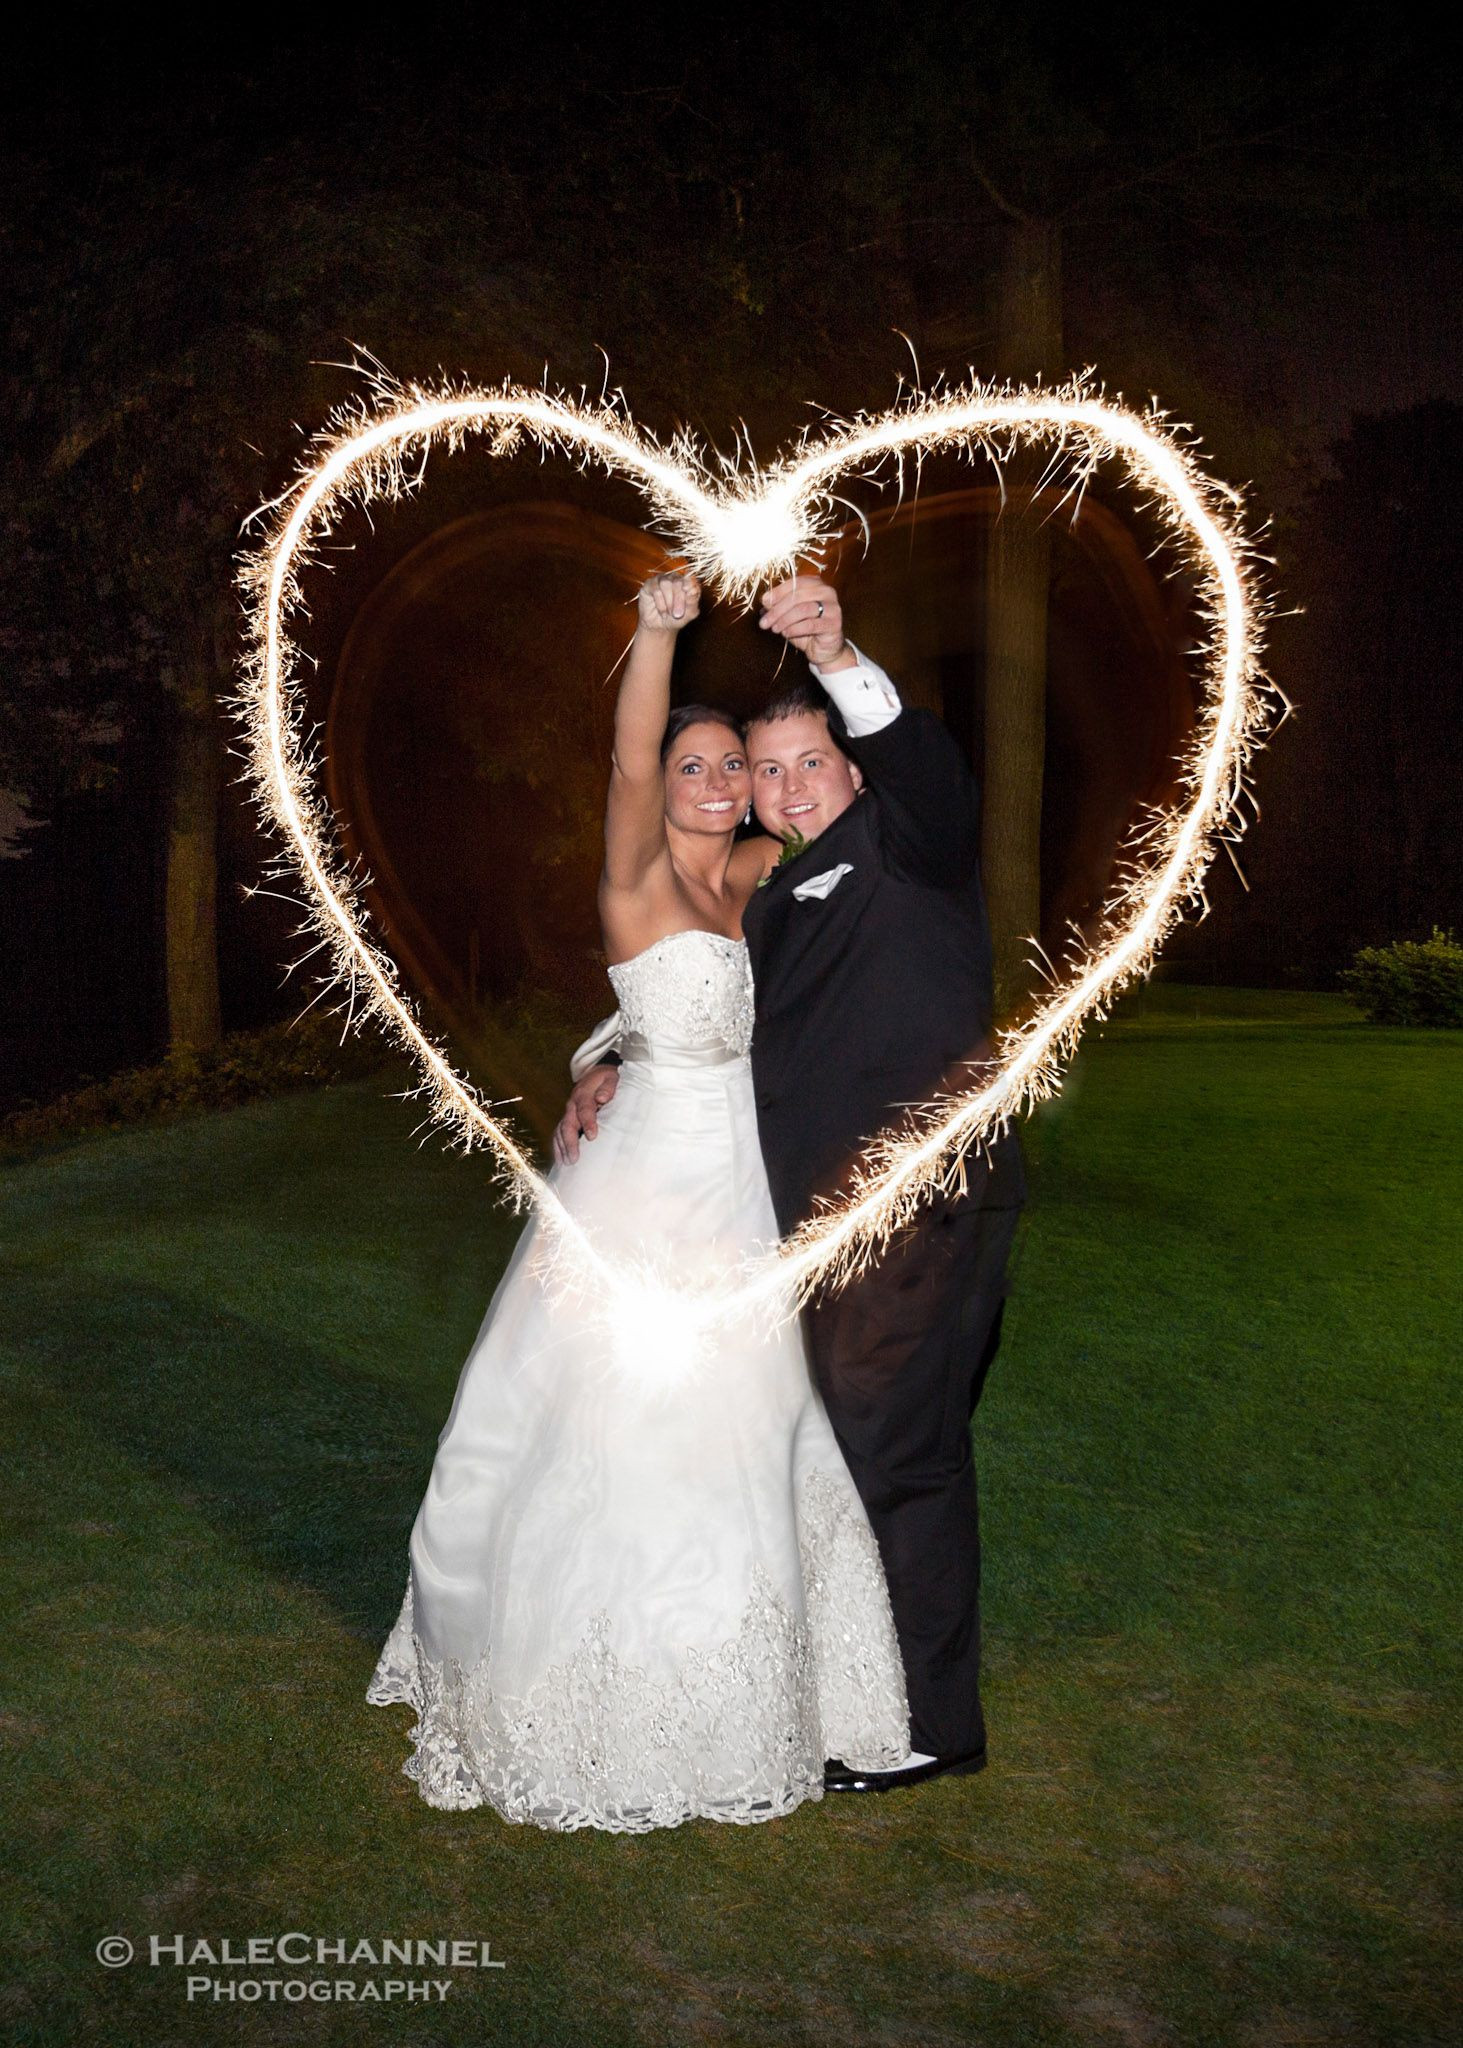 How To Photograph Wedding Sparklers
 This sparkler writing article shows you how 12 stunningly